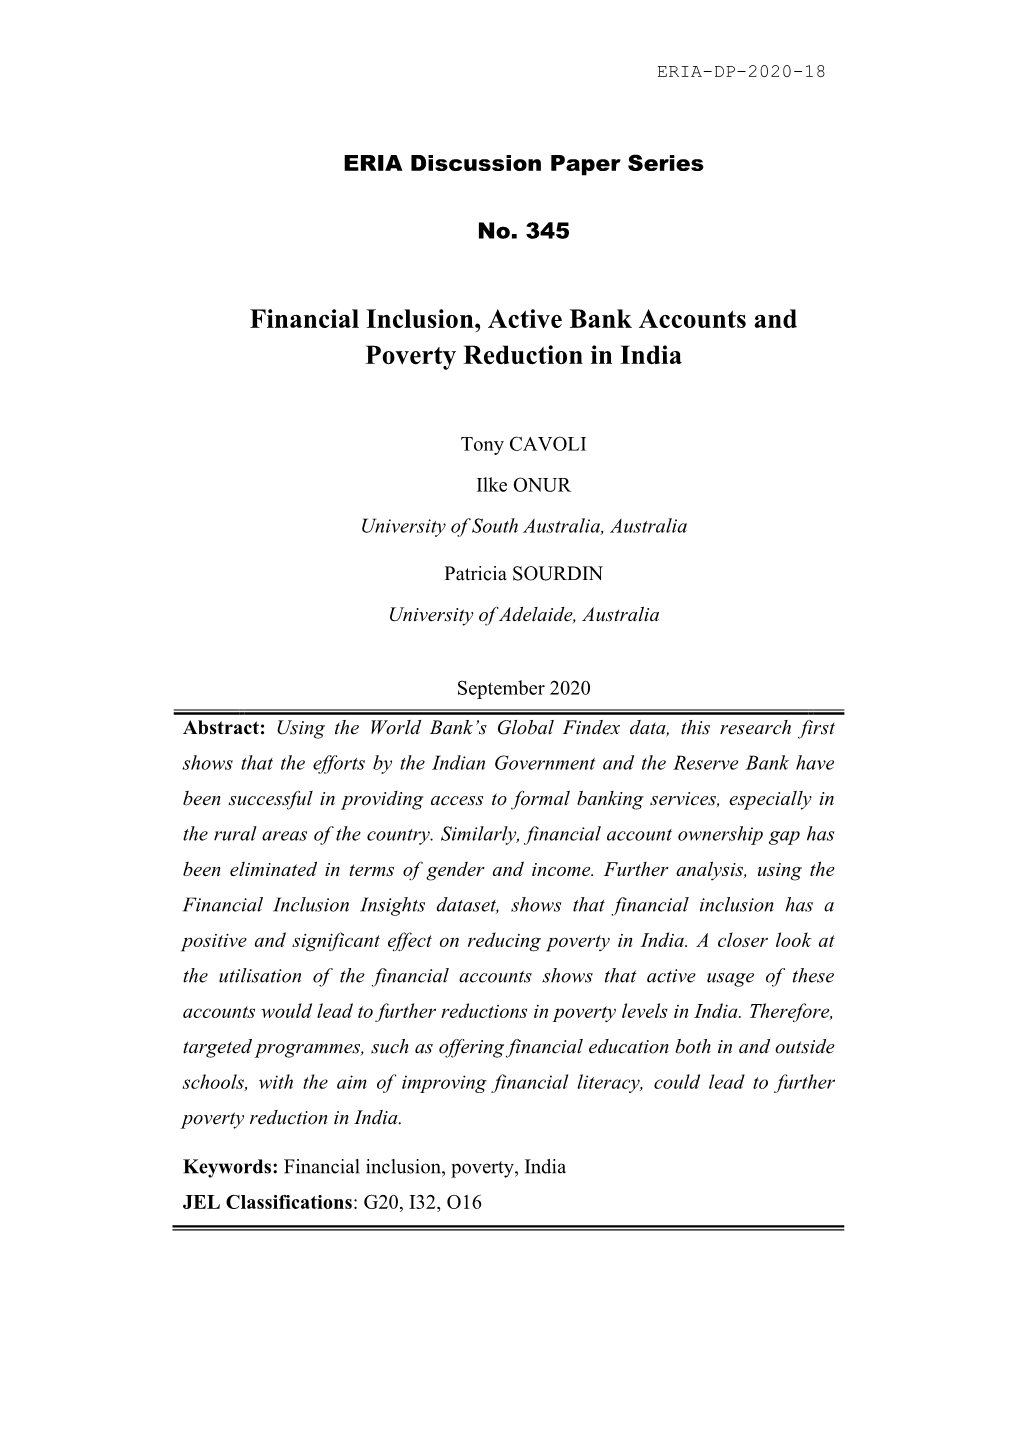 Financial Inclusion, Active Bank Accounts and Poverty Reduction in India